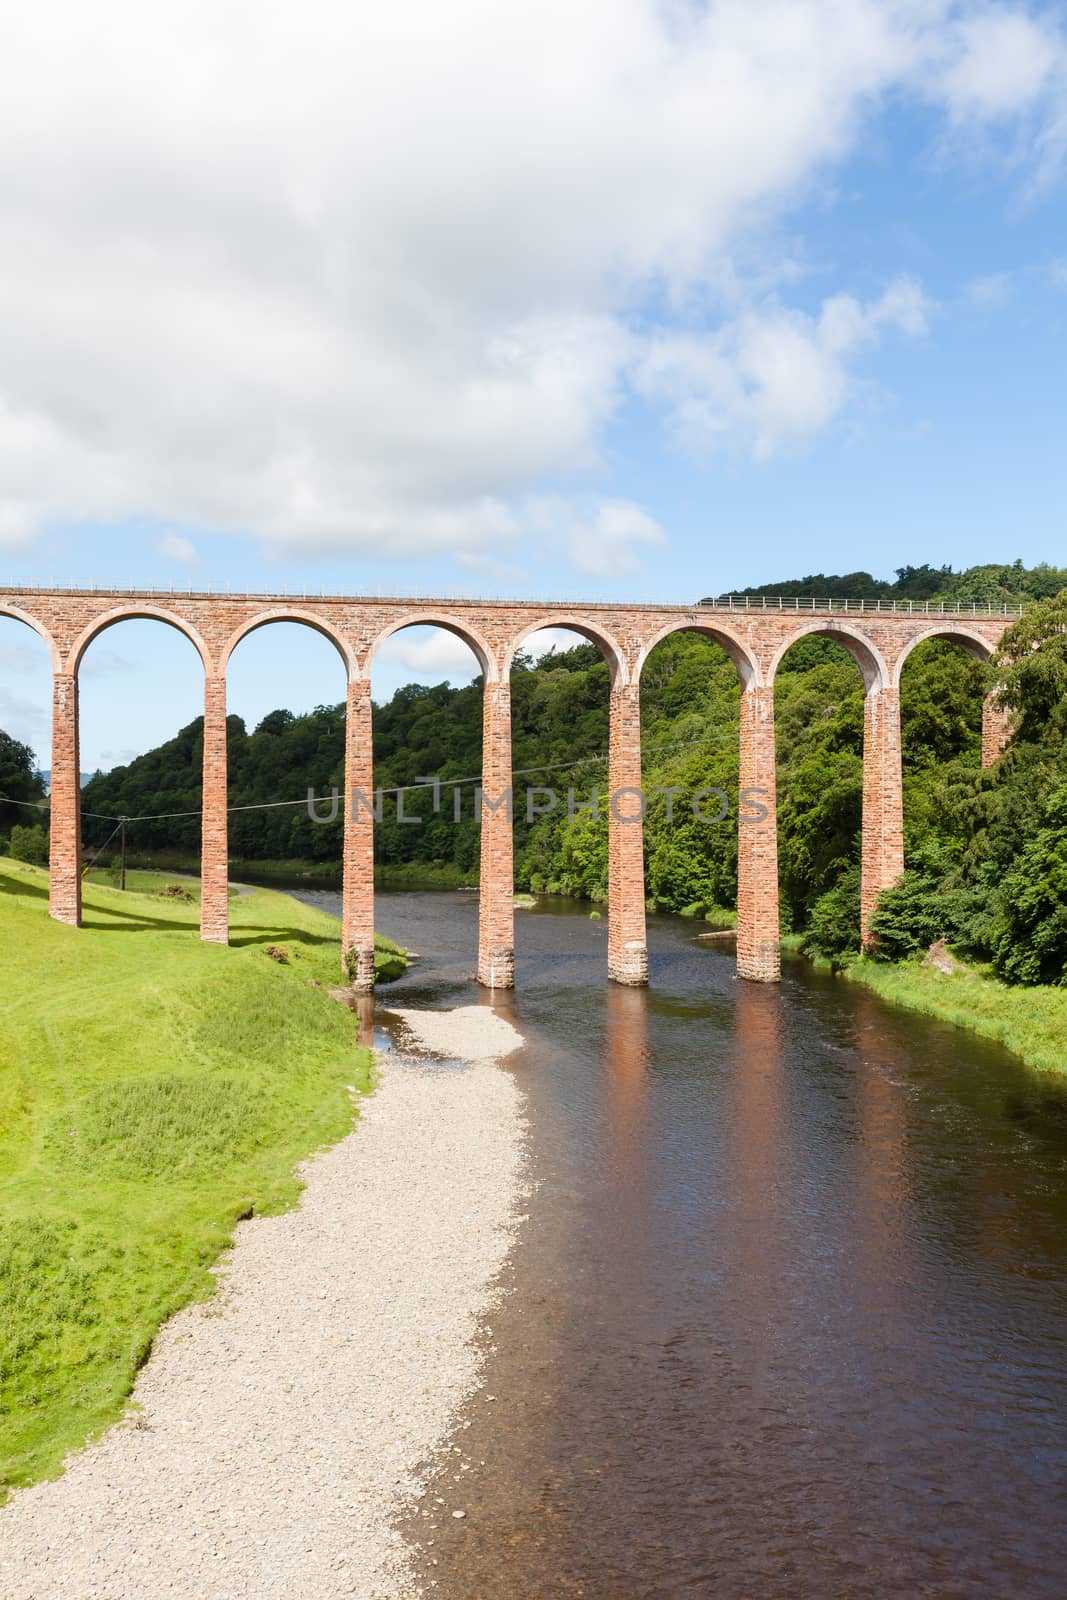 Leaderfoot Viaduct by ATGImages